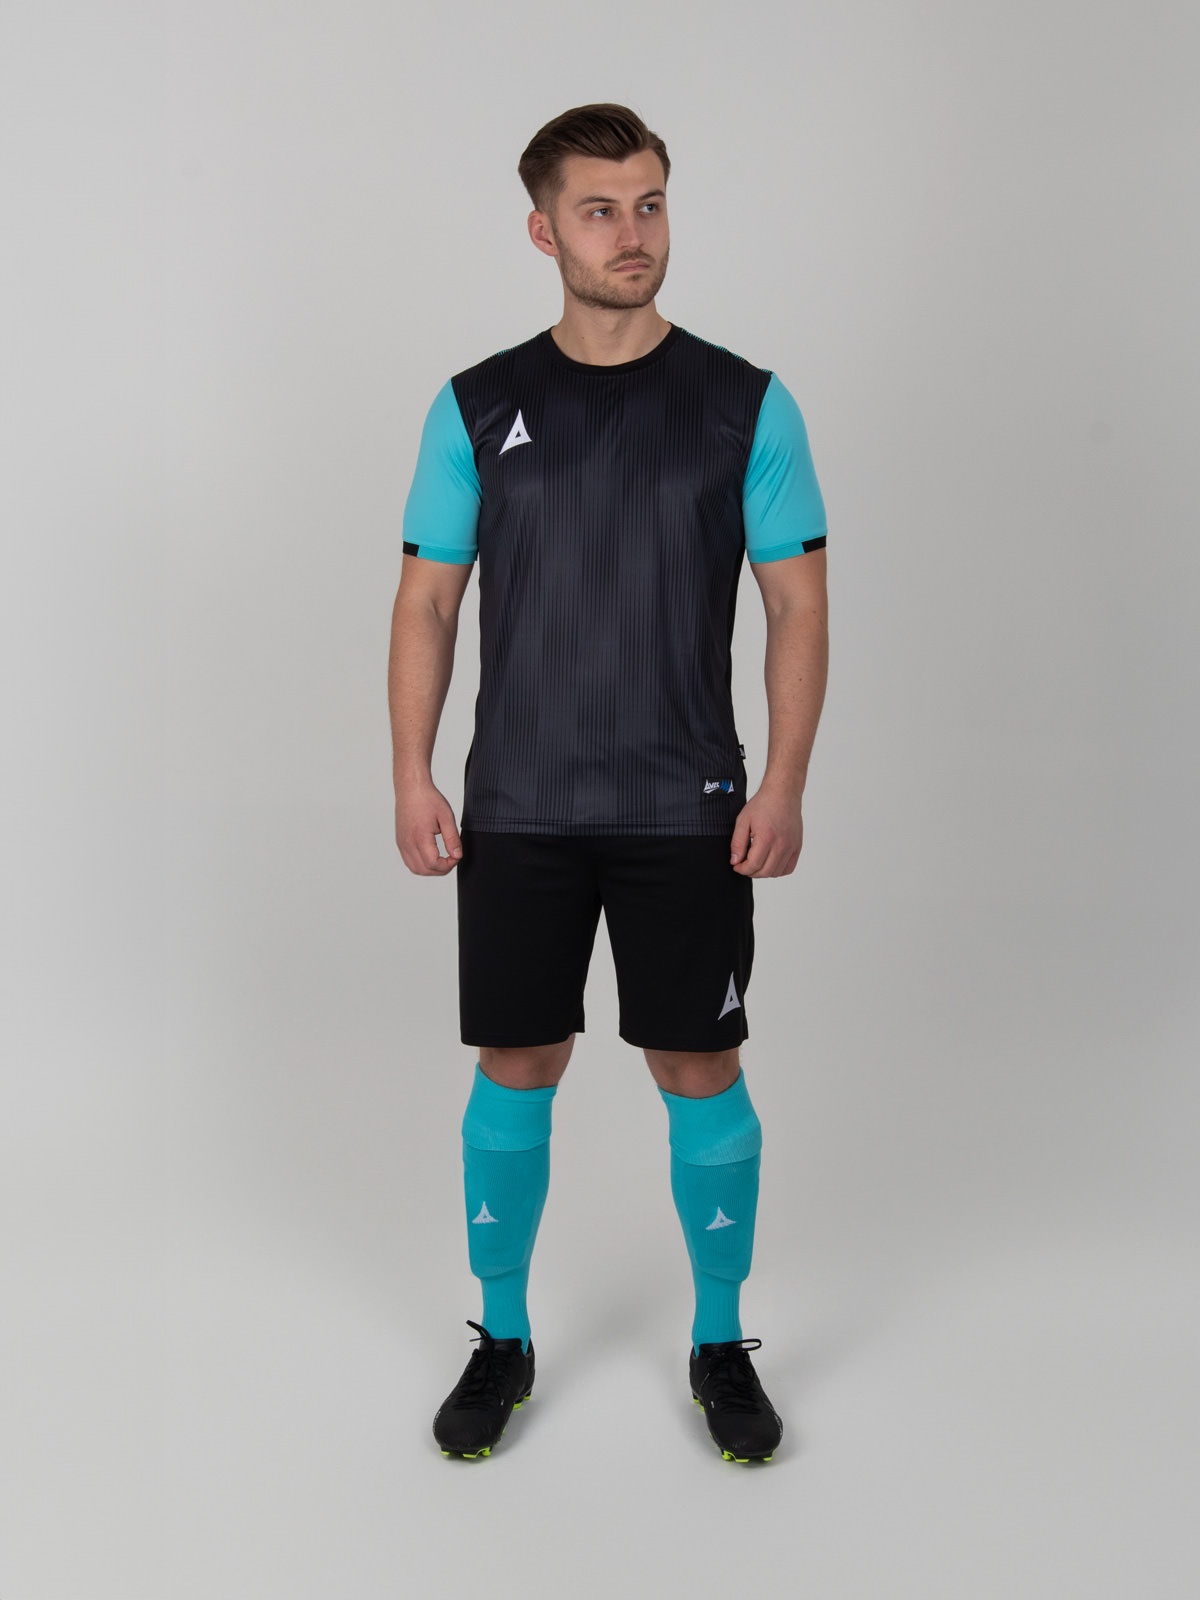 a man is wearing a black football shirt with pale blue sleeves, black shorts and light blue socks. 